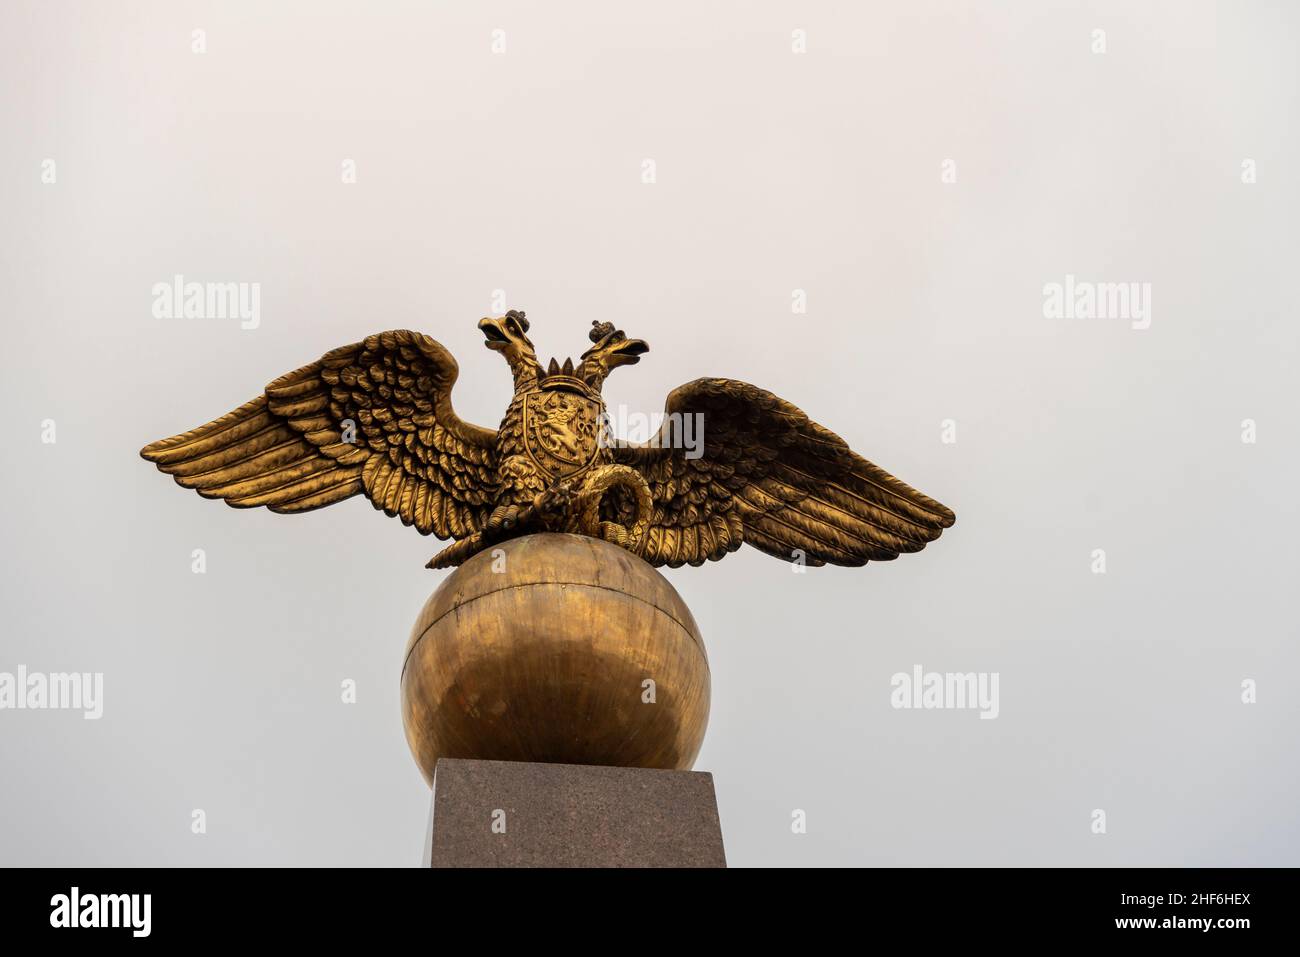 Helsinki,  Finland,  Stele of the Empress,  Keisarinnankivi,  consists of a double-headed eagle perched on a golden ball. Monument commemorates the visit of the Russian Tsarina Alexandra Feodorovna to Helsinki. Stock Photo